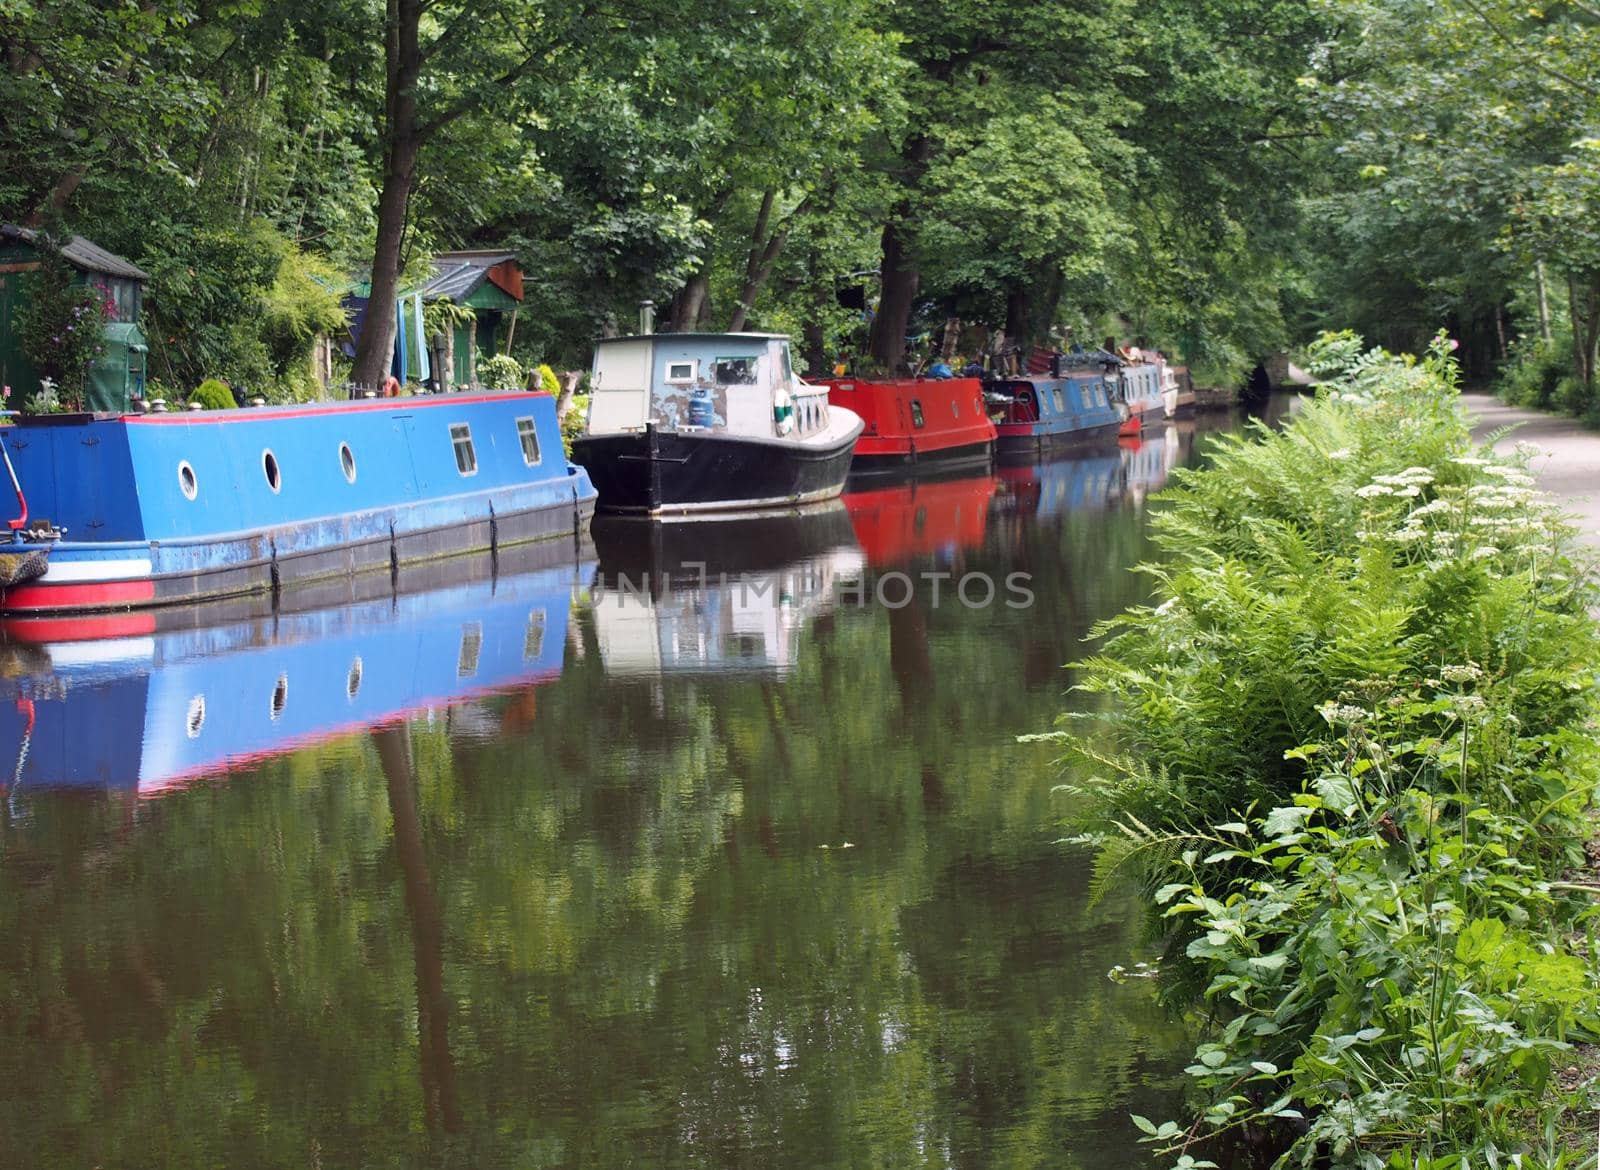 narrow boats and barges moored on the rochdale canal in hebden bridge surrounded by green summer trees by philopenshaw